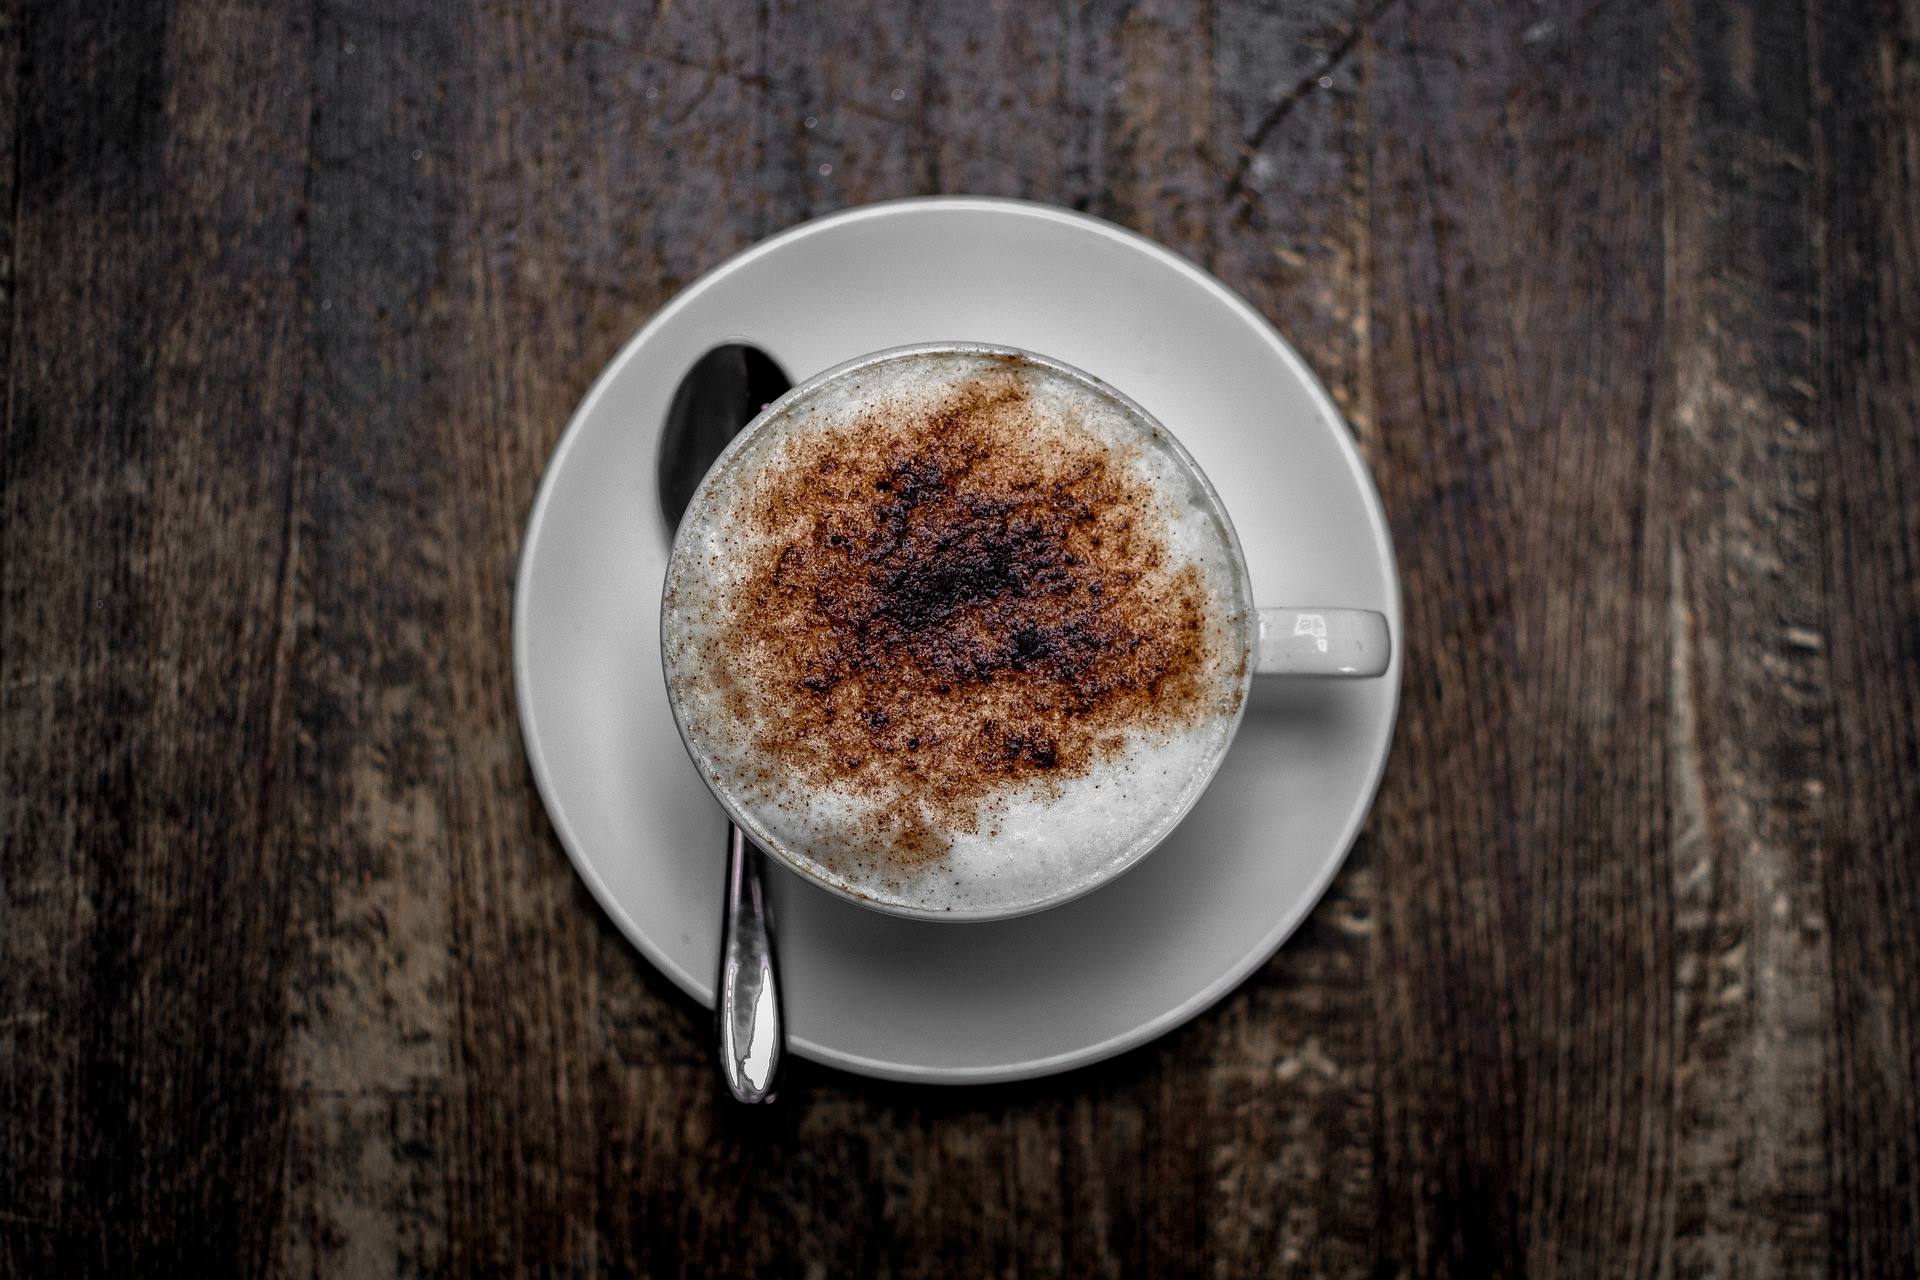 Cup of cappuccino coffee